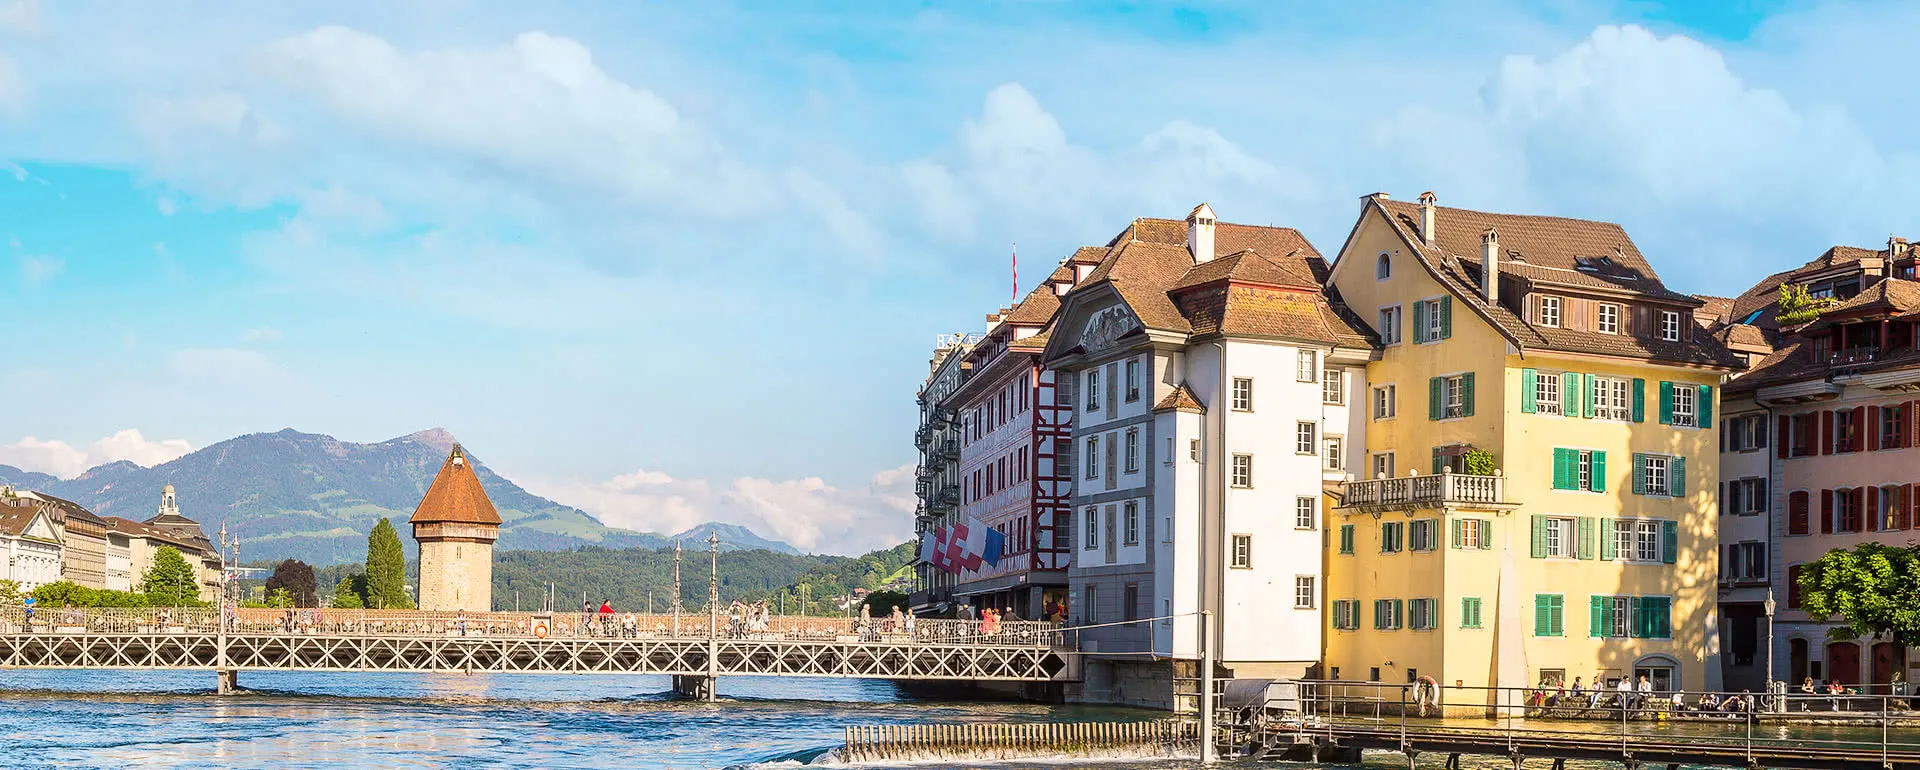 Meeting and conference location Luzern